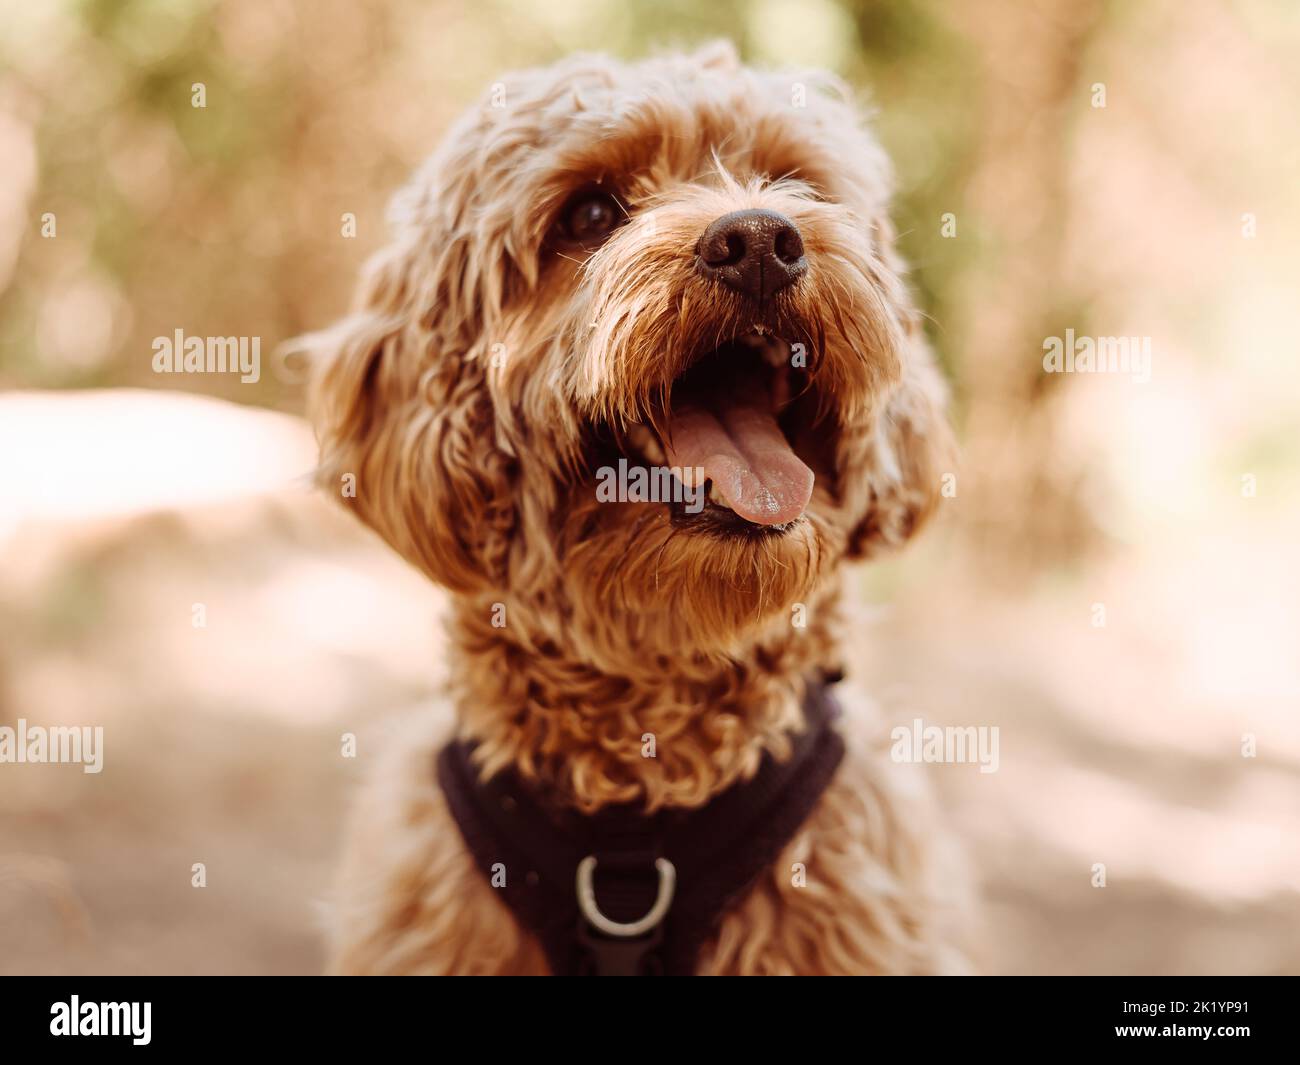 Cavapoo dog wearing black harness sitting steady with tongue out, looking to left side. Female dog with curly fur sitting in the woods. Stock Photo